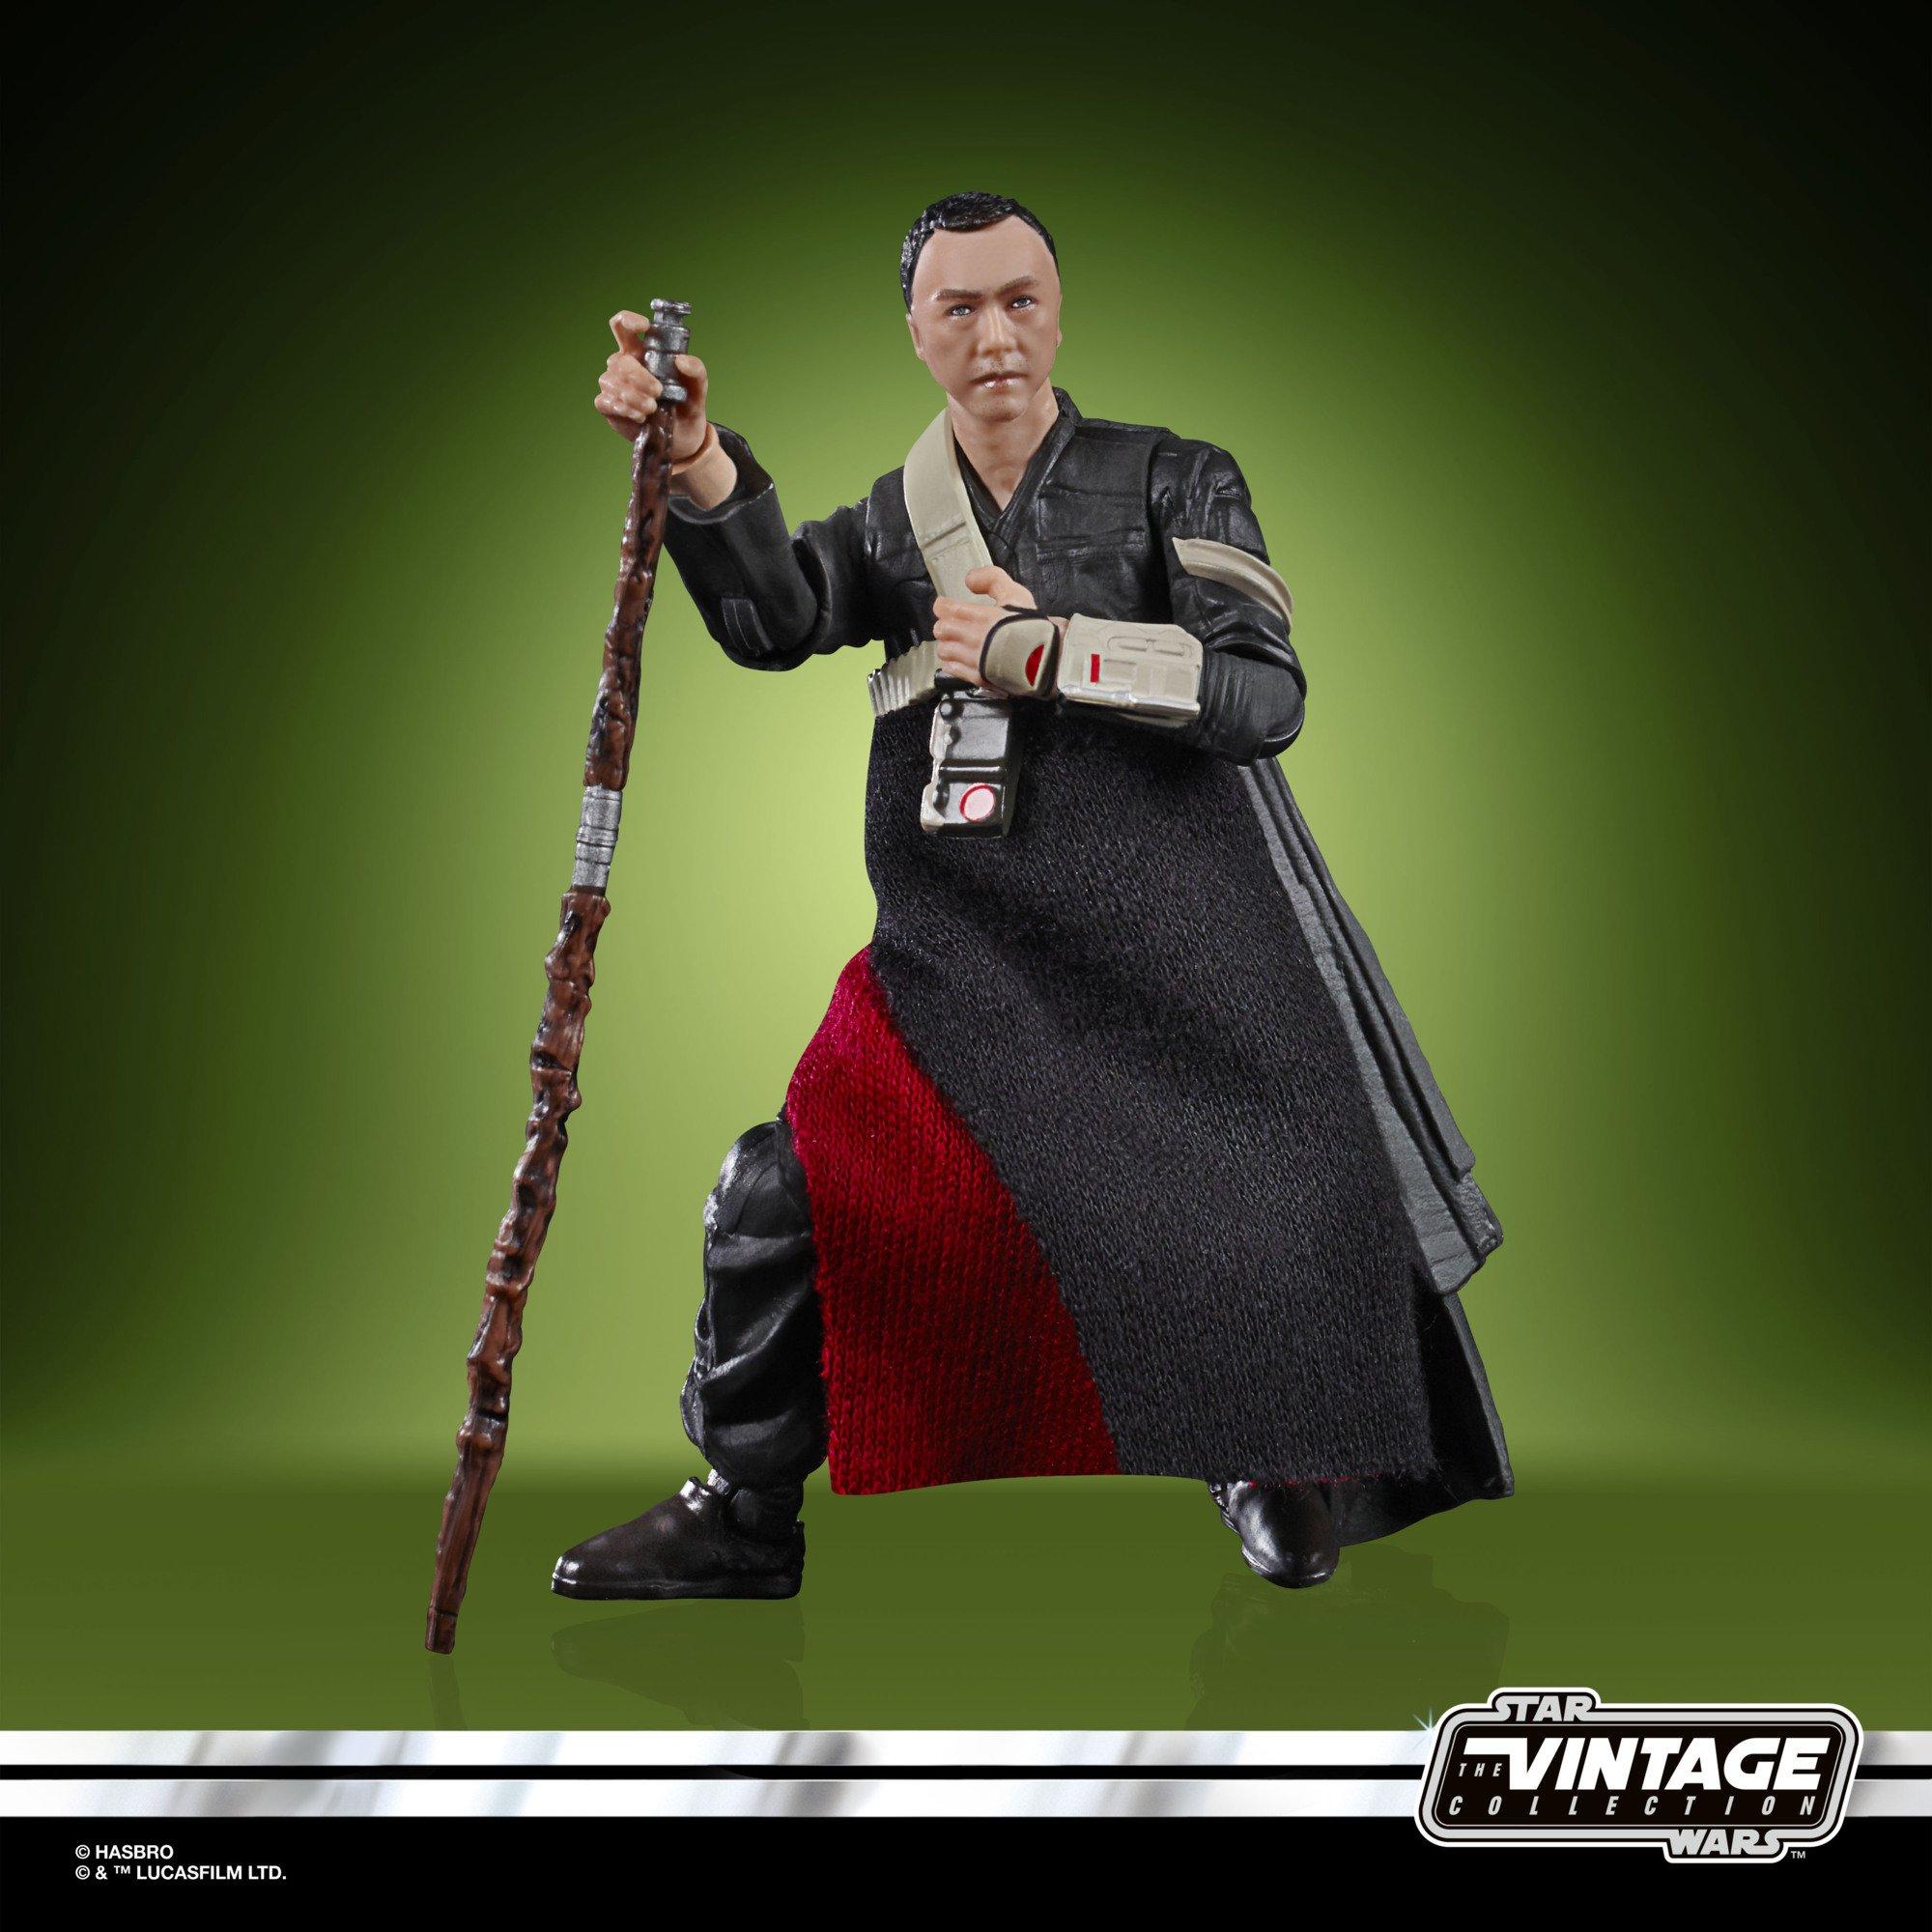 Hasbro Star Wars: The Vintage Collection Rogue One Chirrut Imwe 3.75-in Action Figure